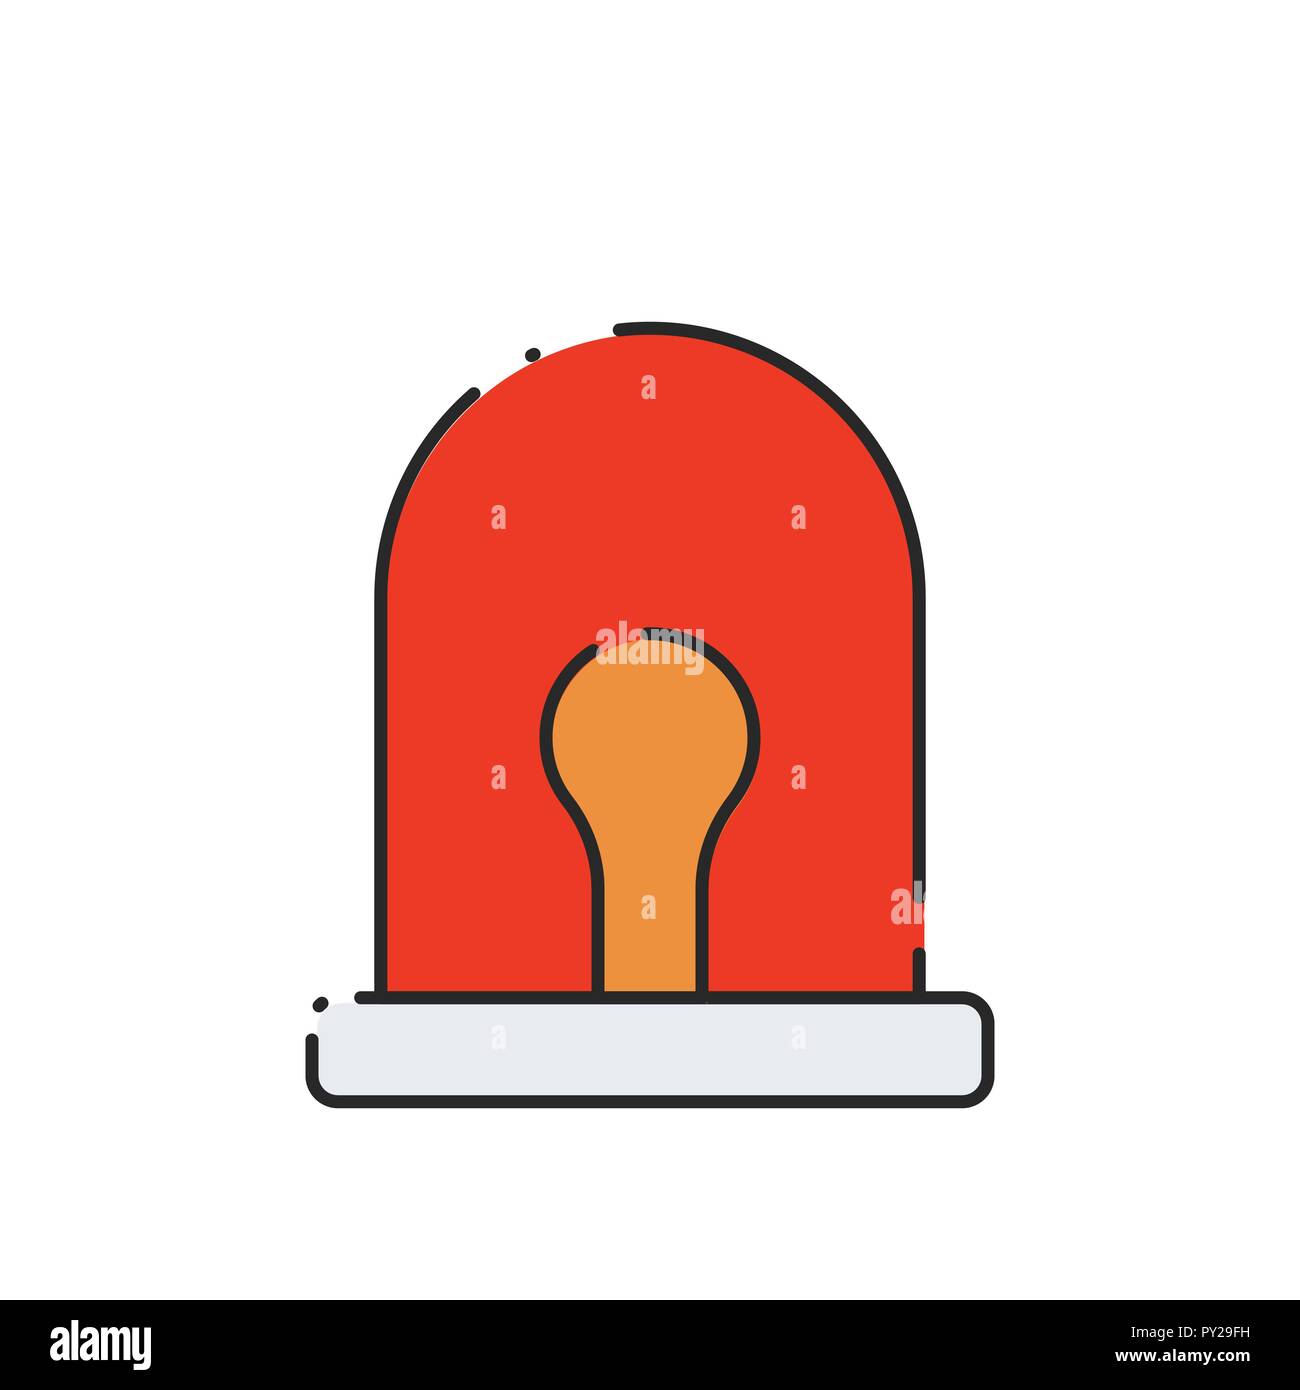 Fire alarm with light. Flat icon. Security system in office vector illustration. Stock Vector